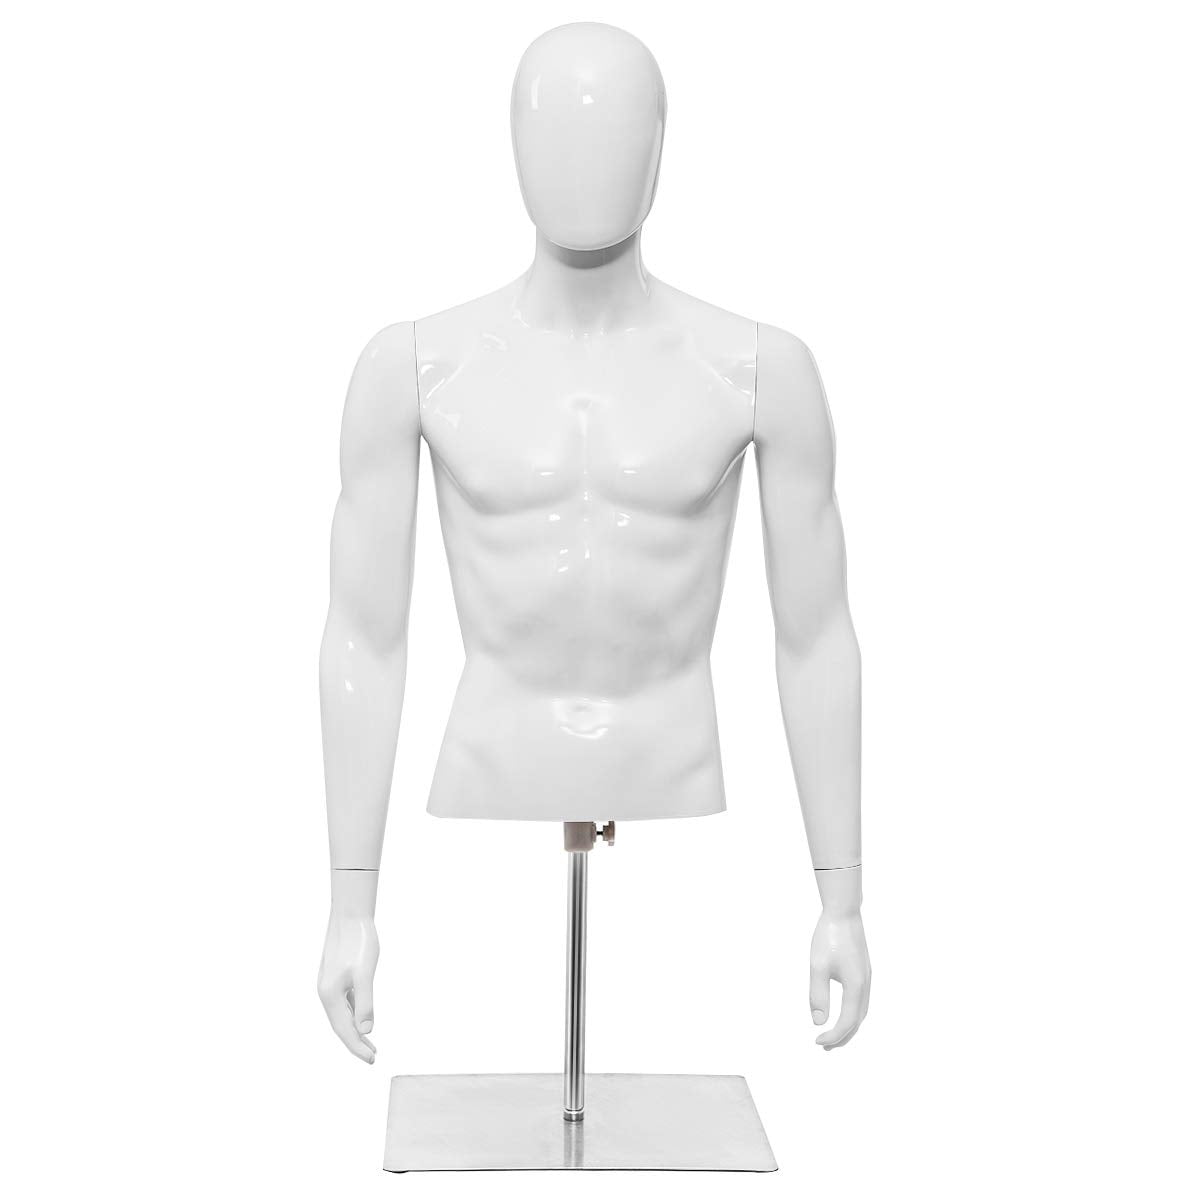 2 FREE-STANDING MANNEQUIN MALE & FEMALE TORSOS SET 1 STAND 2 REMOVAL HANGERS 